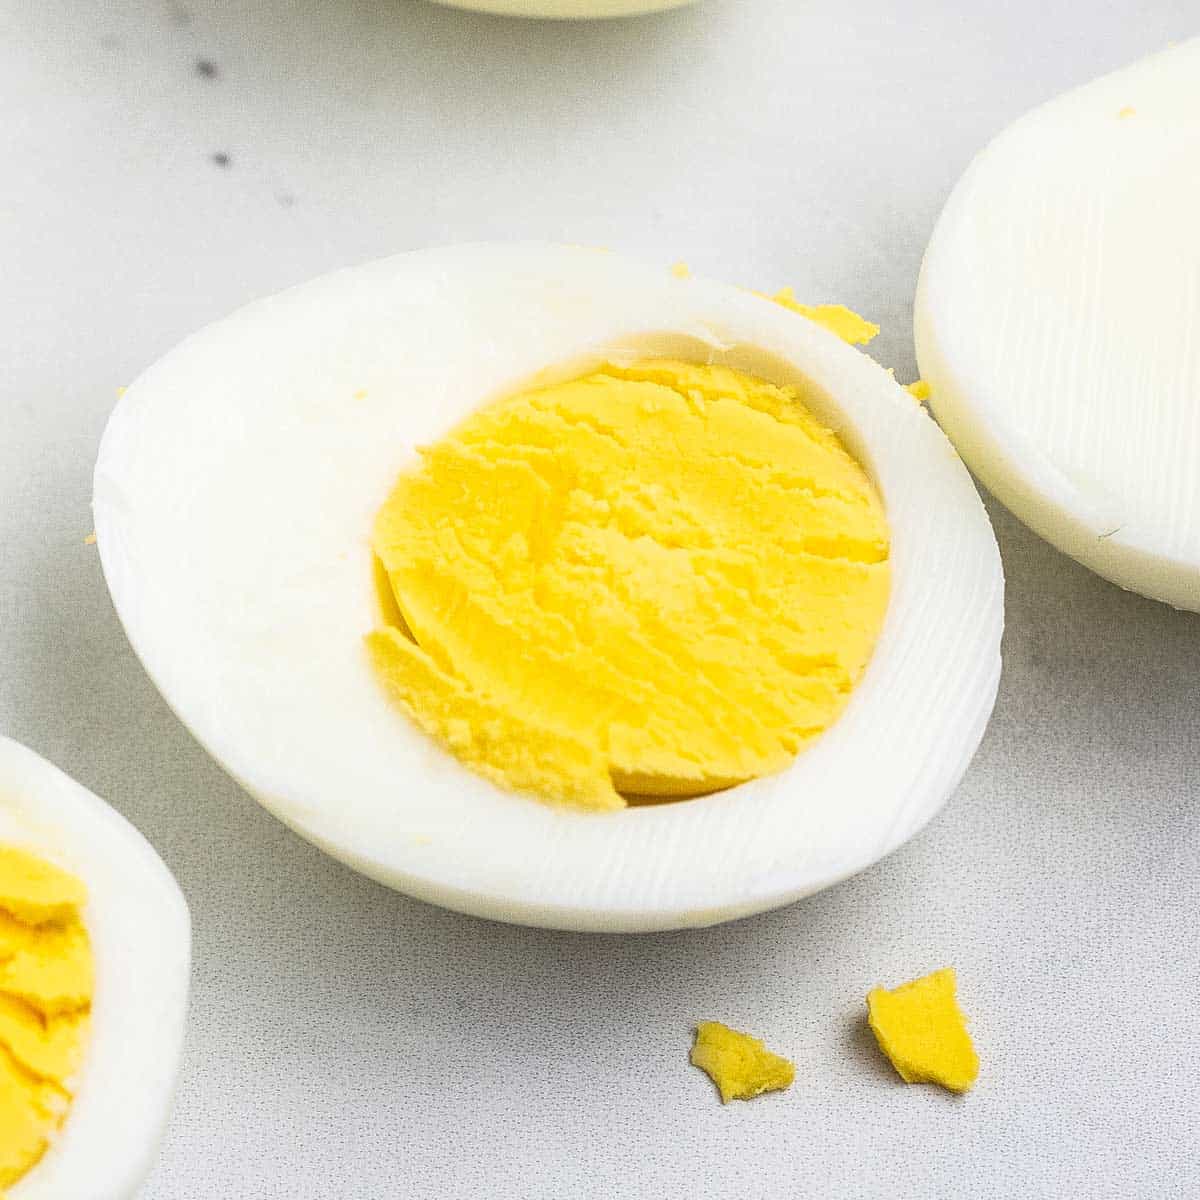 https://www.thechunkychef.com/wp-content/uploads/2021/03/Instant-Pot-Hard-Boiled-Eggs-recipe-card.jpg